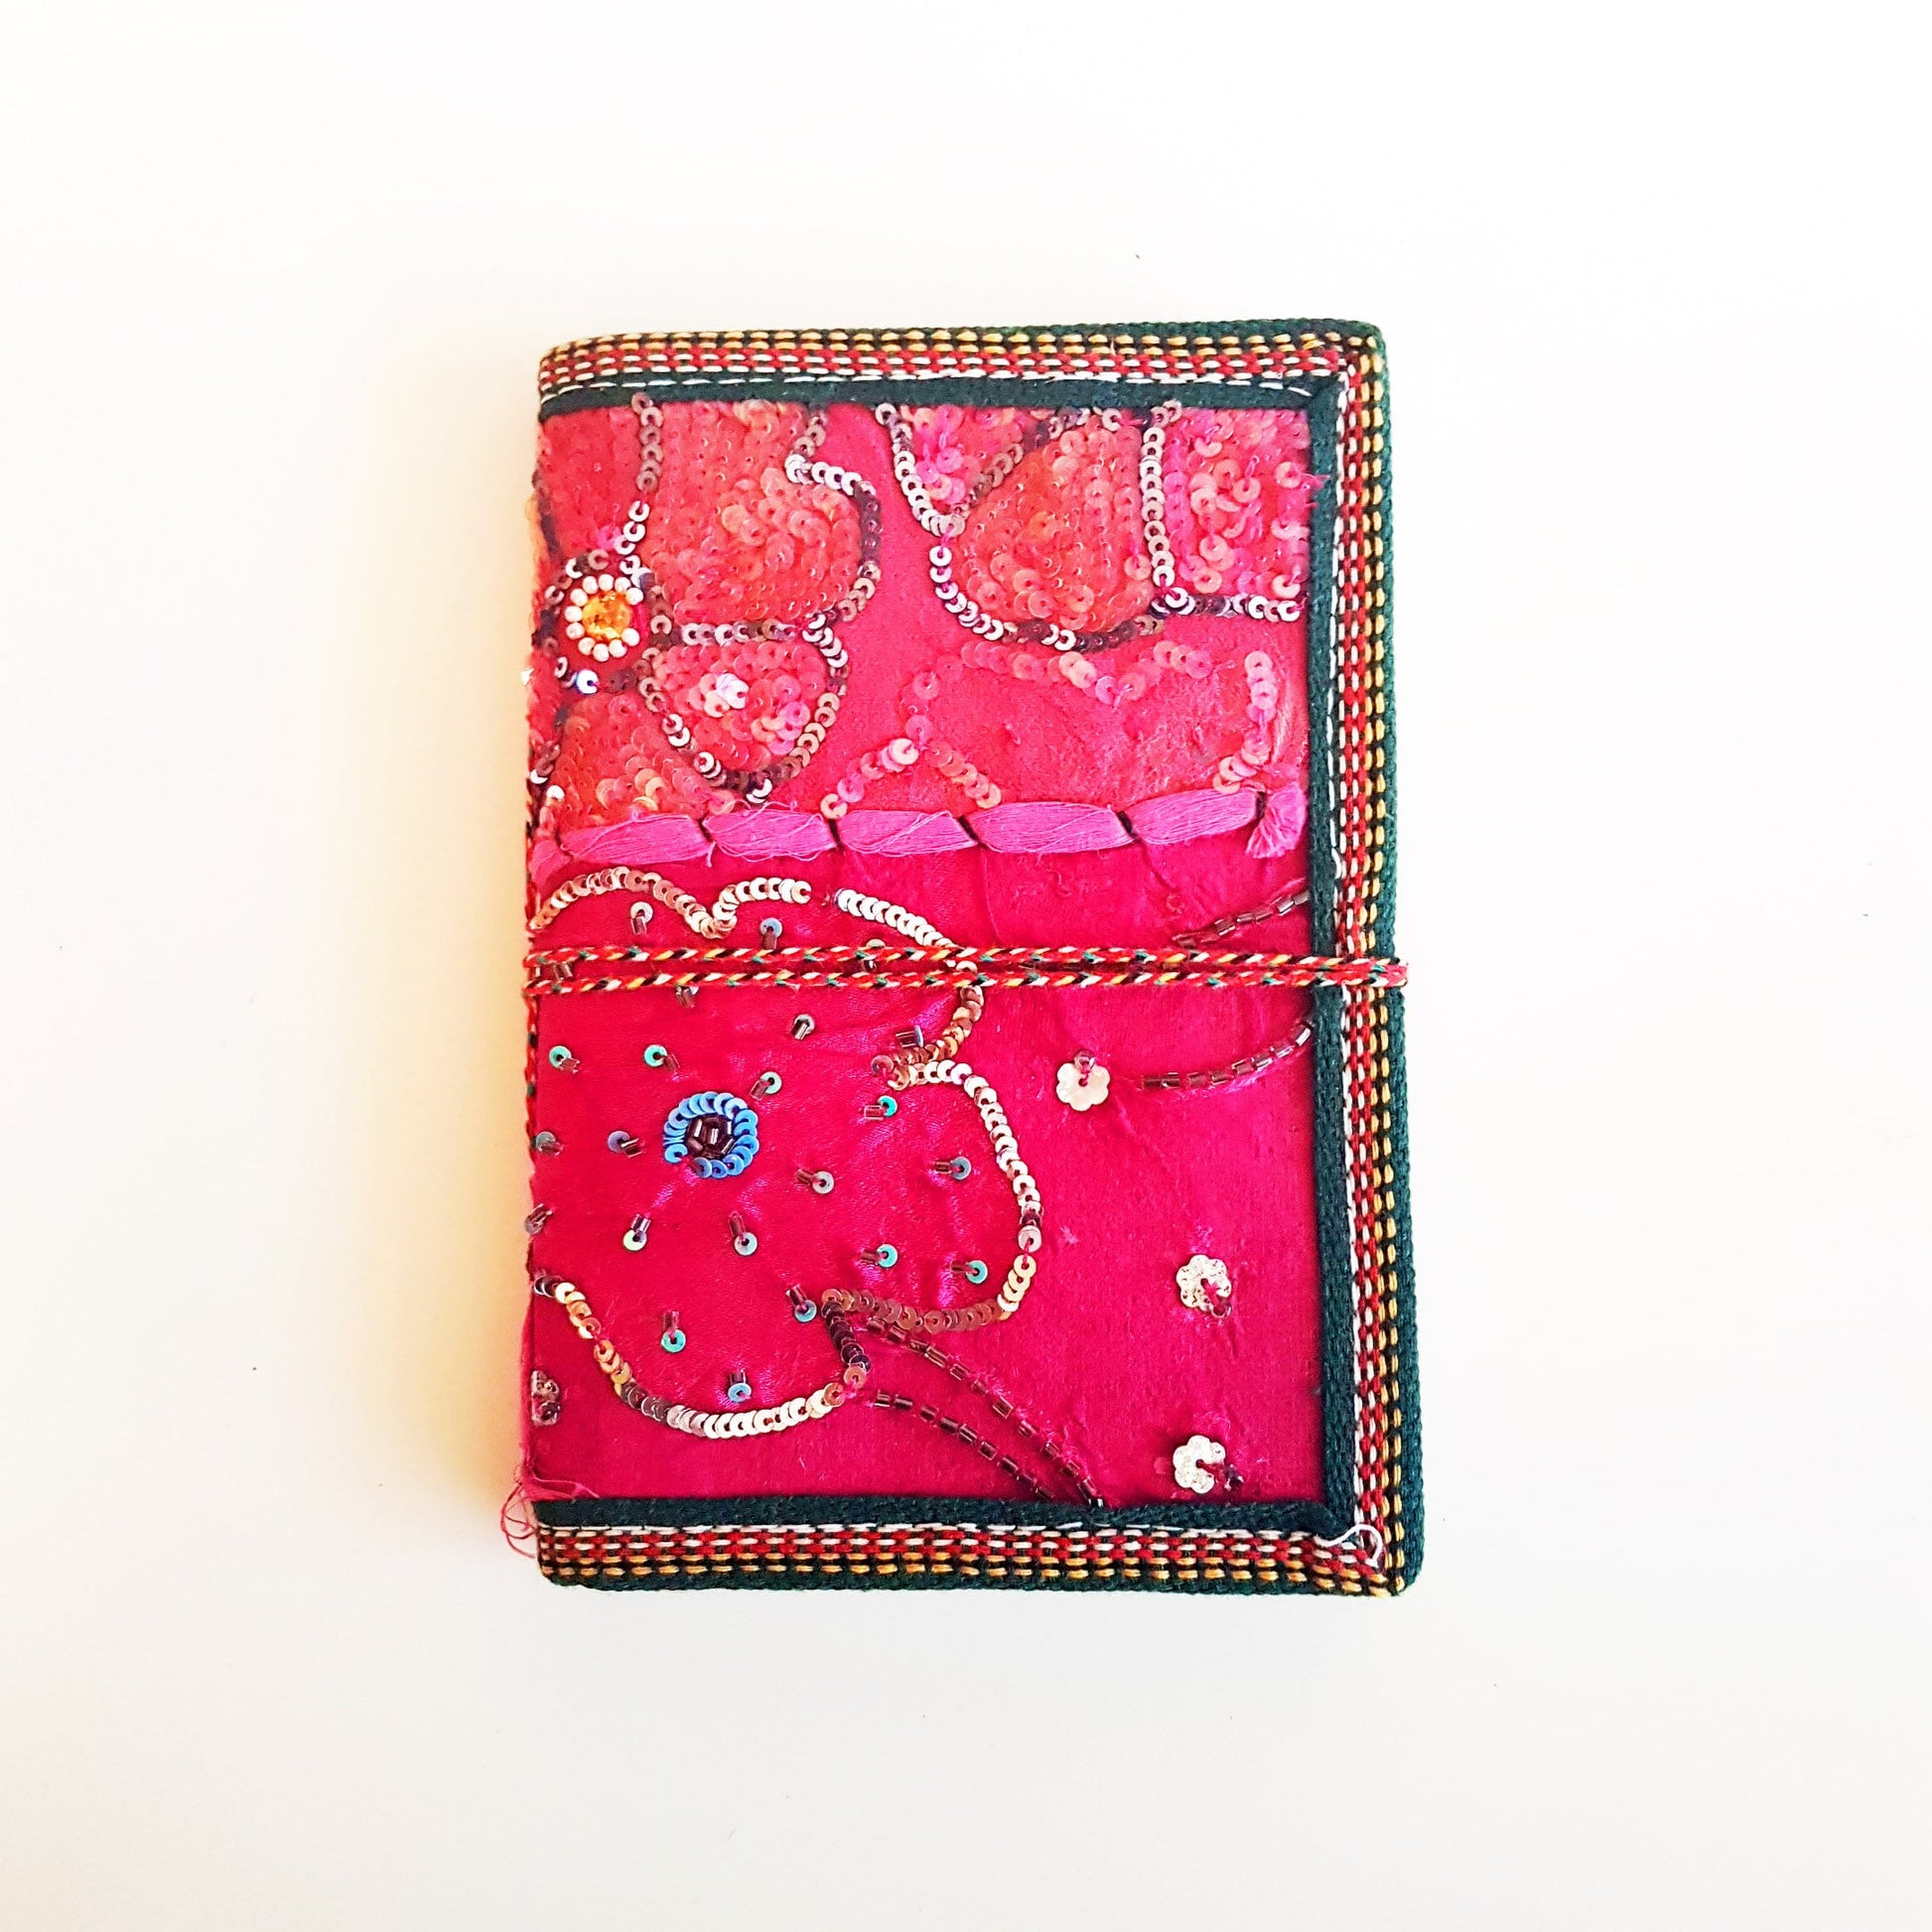 Vintage textile art journal  5 x 7 inch blank book. One of kind handmade notebook diary with a unique beaded jewelled fabric collage cover. - Vintage India Ca